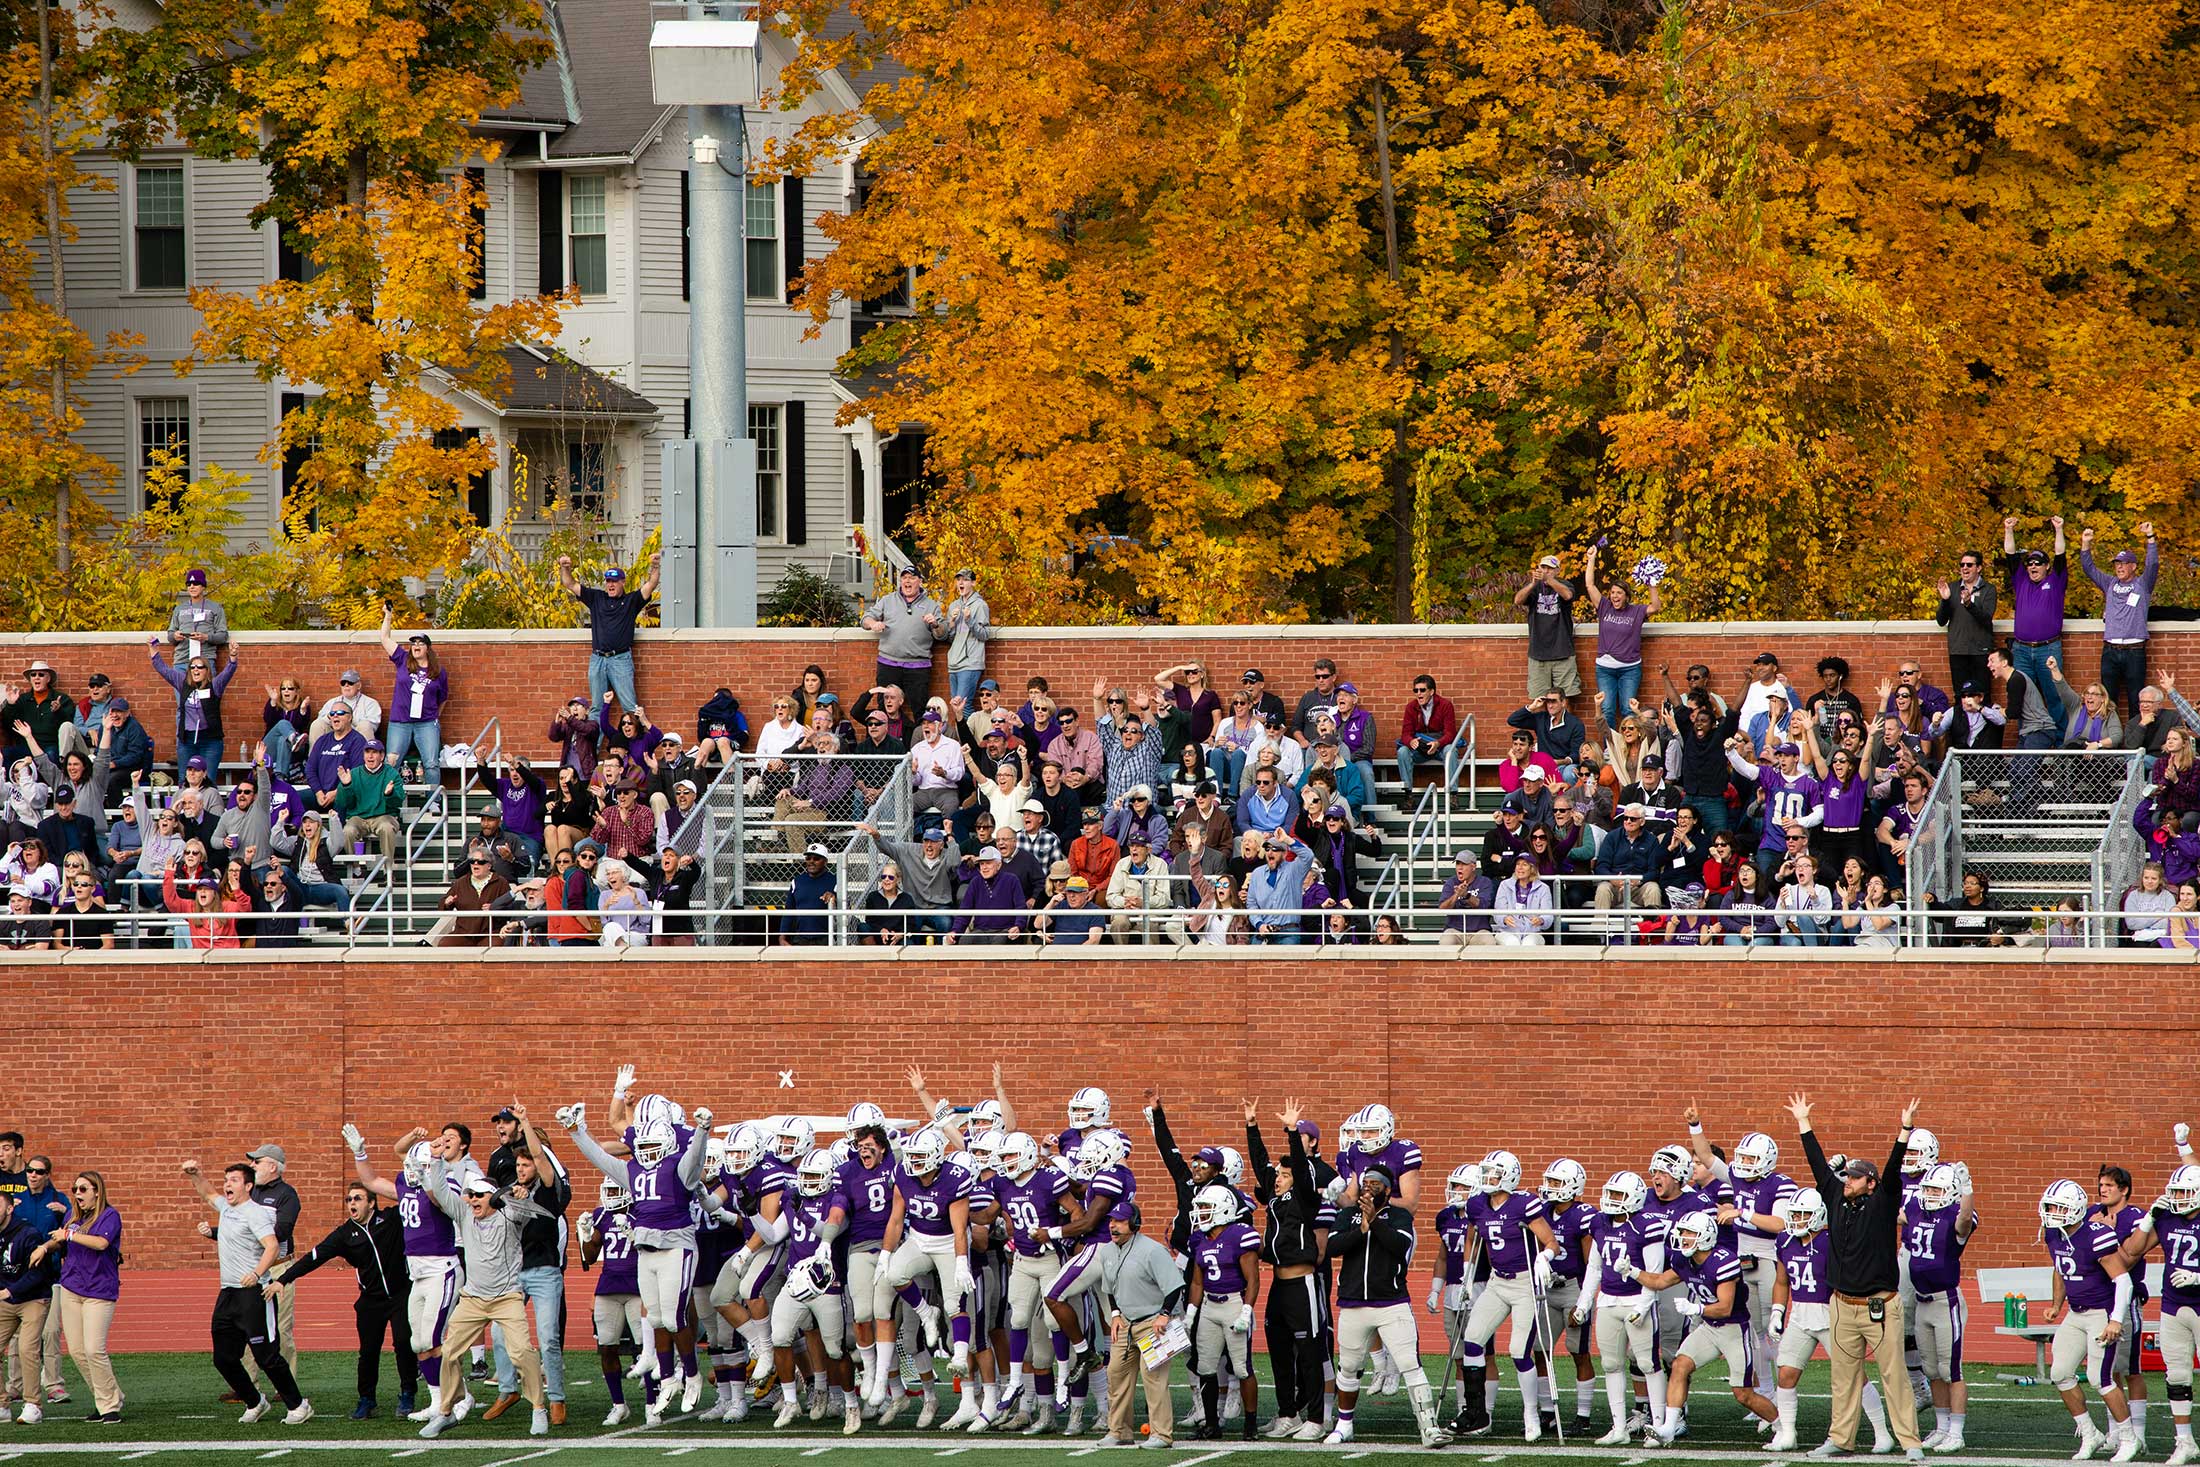 Amherst College football team and fans reacting to a play